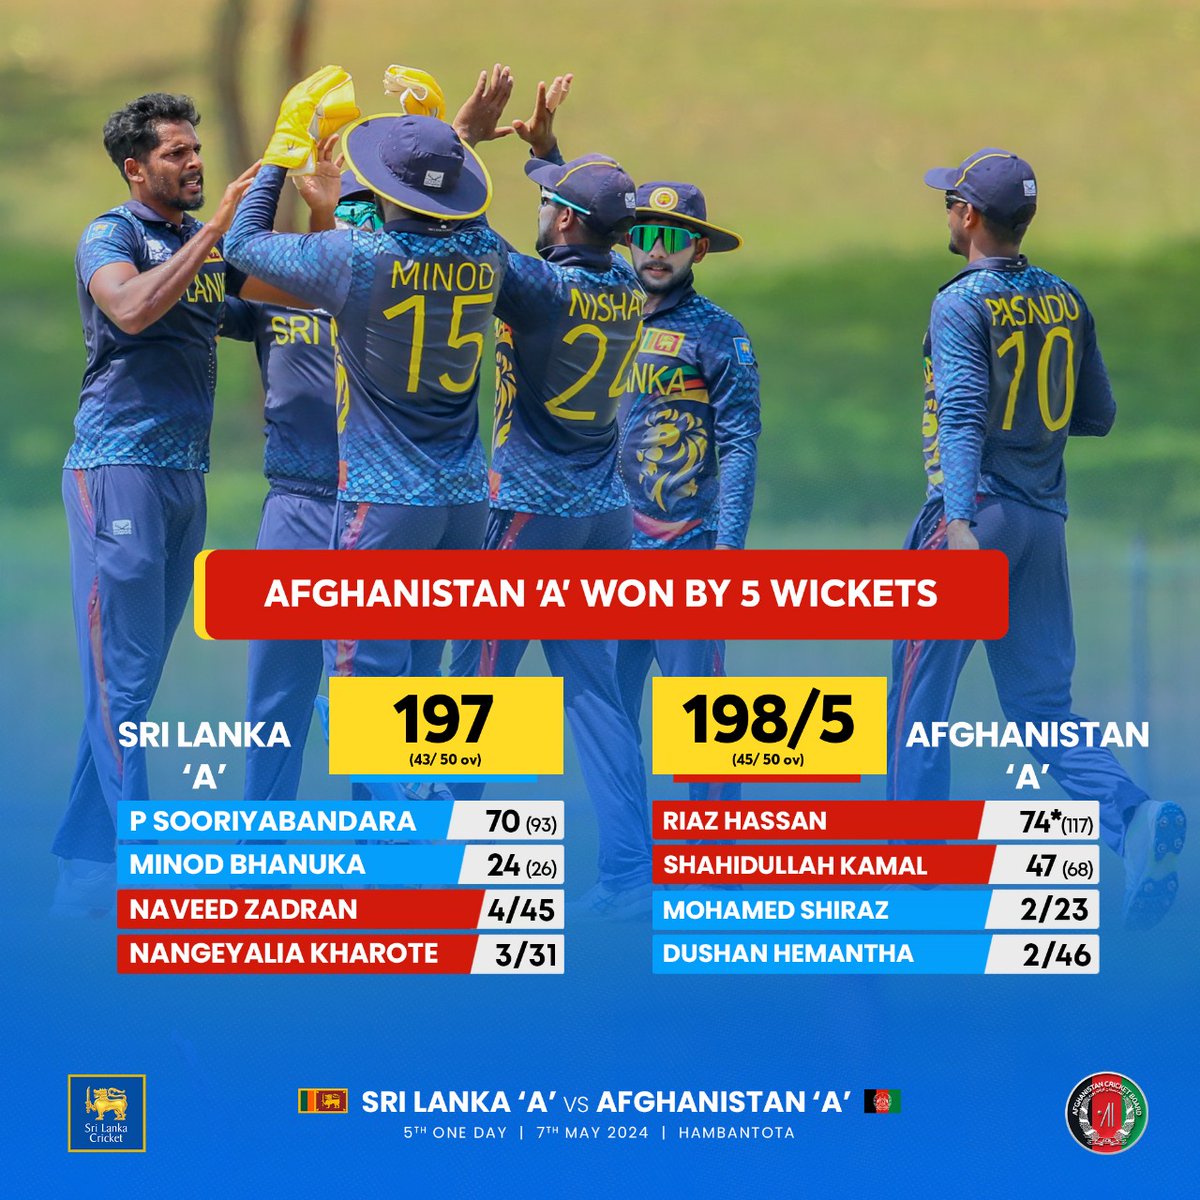 Great fight from both teams throughout the ODI series! While Afghanistan claimed the final match by 5 wickets, Sri Lanka takes the series win 3-2! #SLvAFG #SLATeam